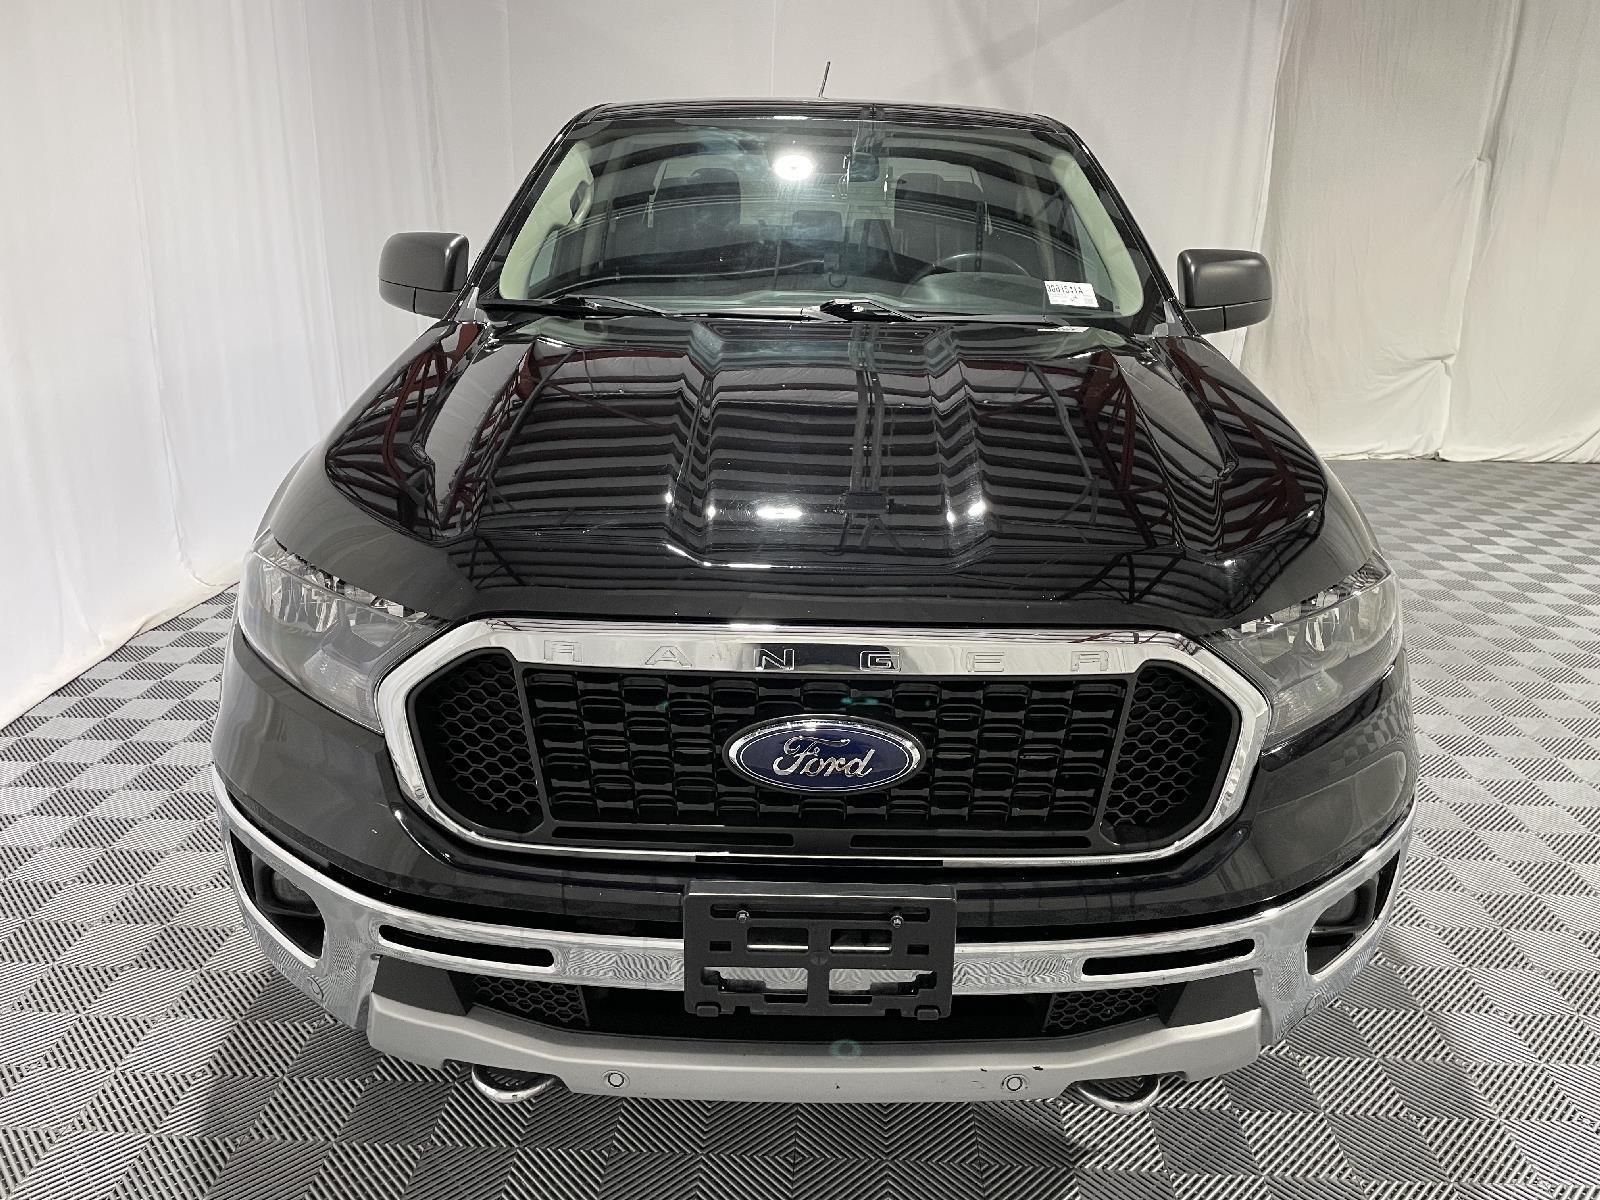 Used 2019 Ford Ranger XLT Crew Cab Truck for sale in St Joseph MO